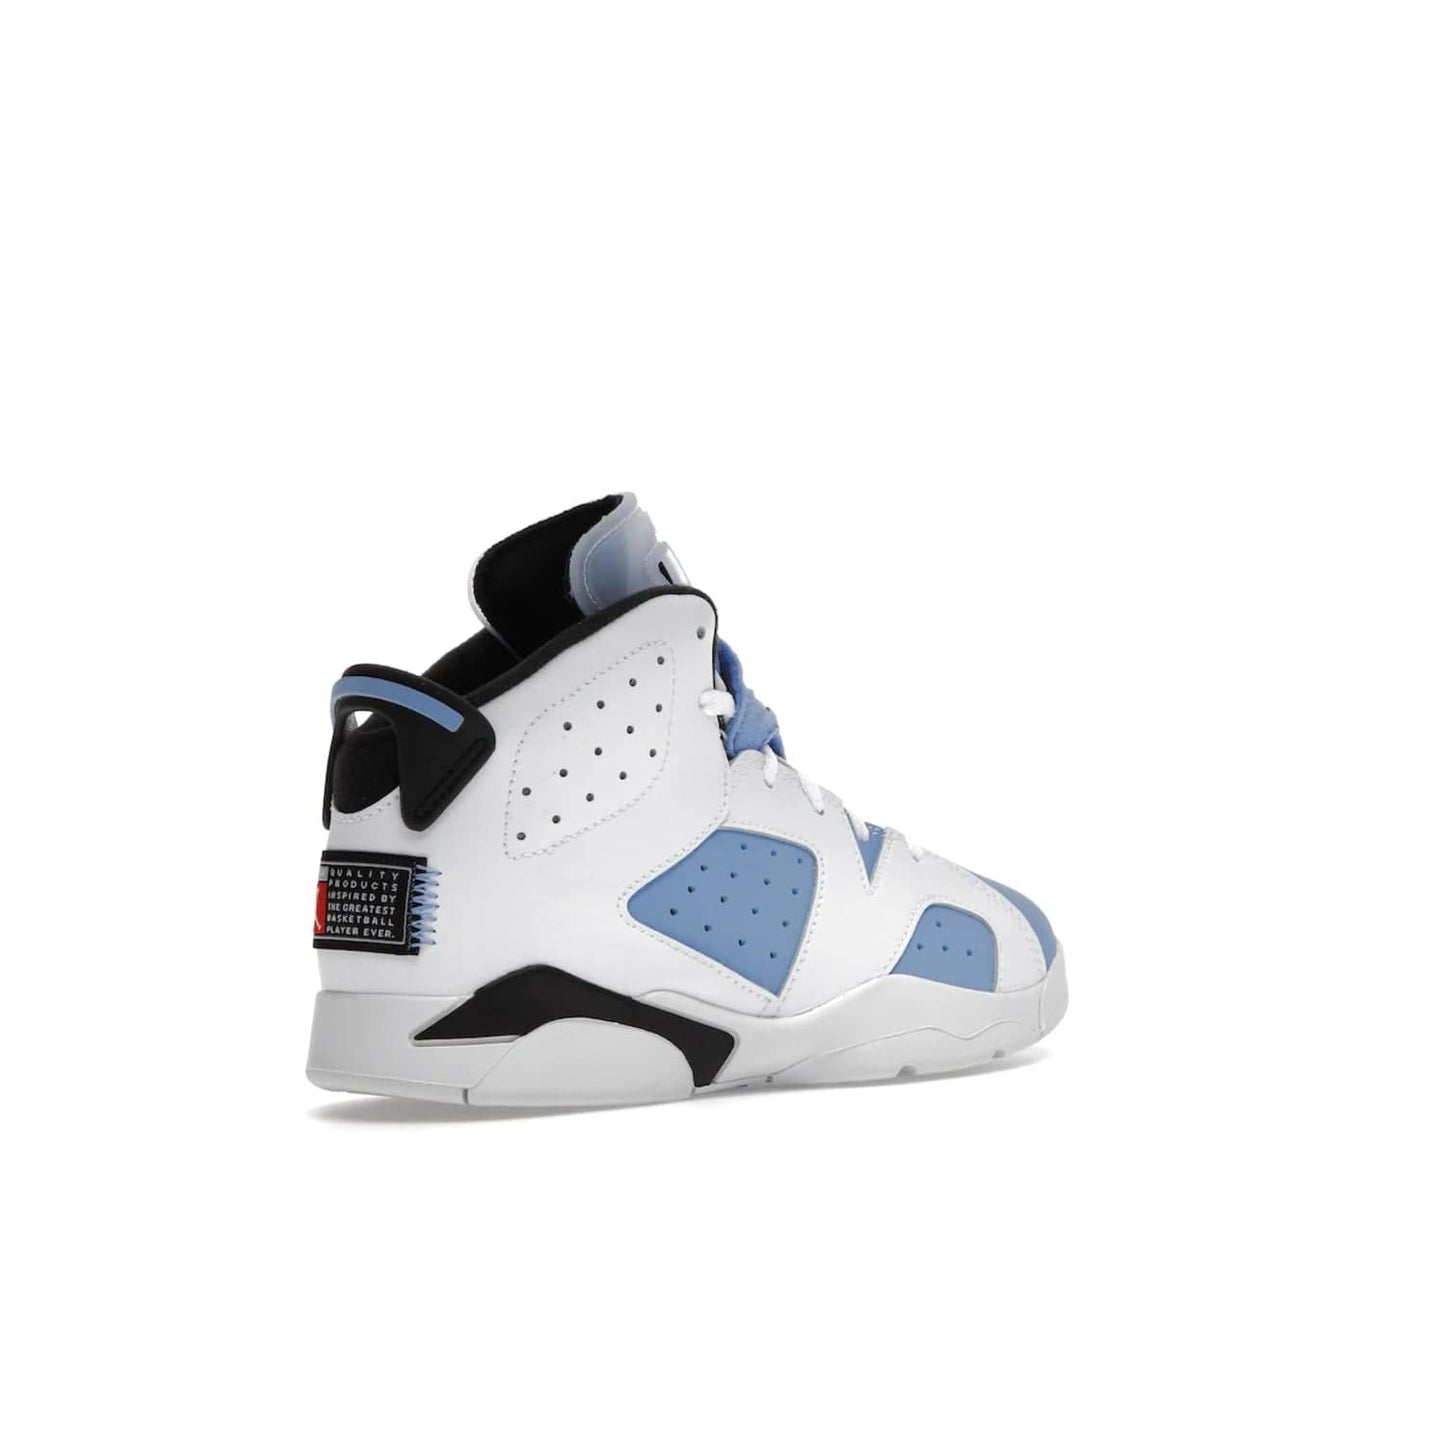 Jordan 6 Retro UNC White (PS) - Image 33 - Only at www.BallersClubKickz.com - The Air Jordan 6 Retro UNC White PS celebrates Michael Jordan's alma mater, the University of North Carolina. It features a classic color-blocking of the iconic Jordan 6 Carmine and a stitched Jordan Team patch. This must-have sneaker released on April 27th, 2022. Referencing the university colors, get this shoe for a stylish and timeless style with university pride.